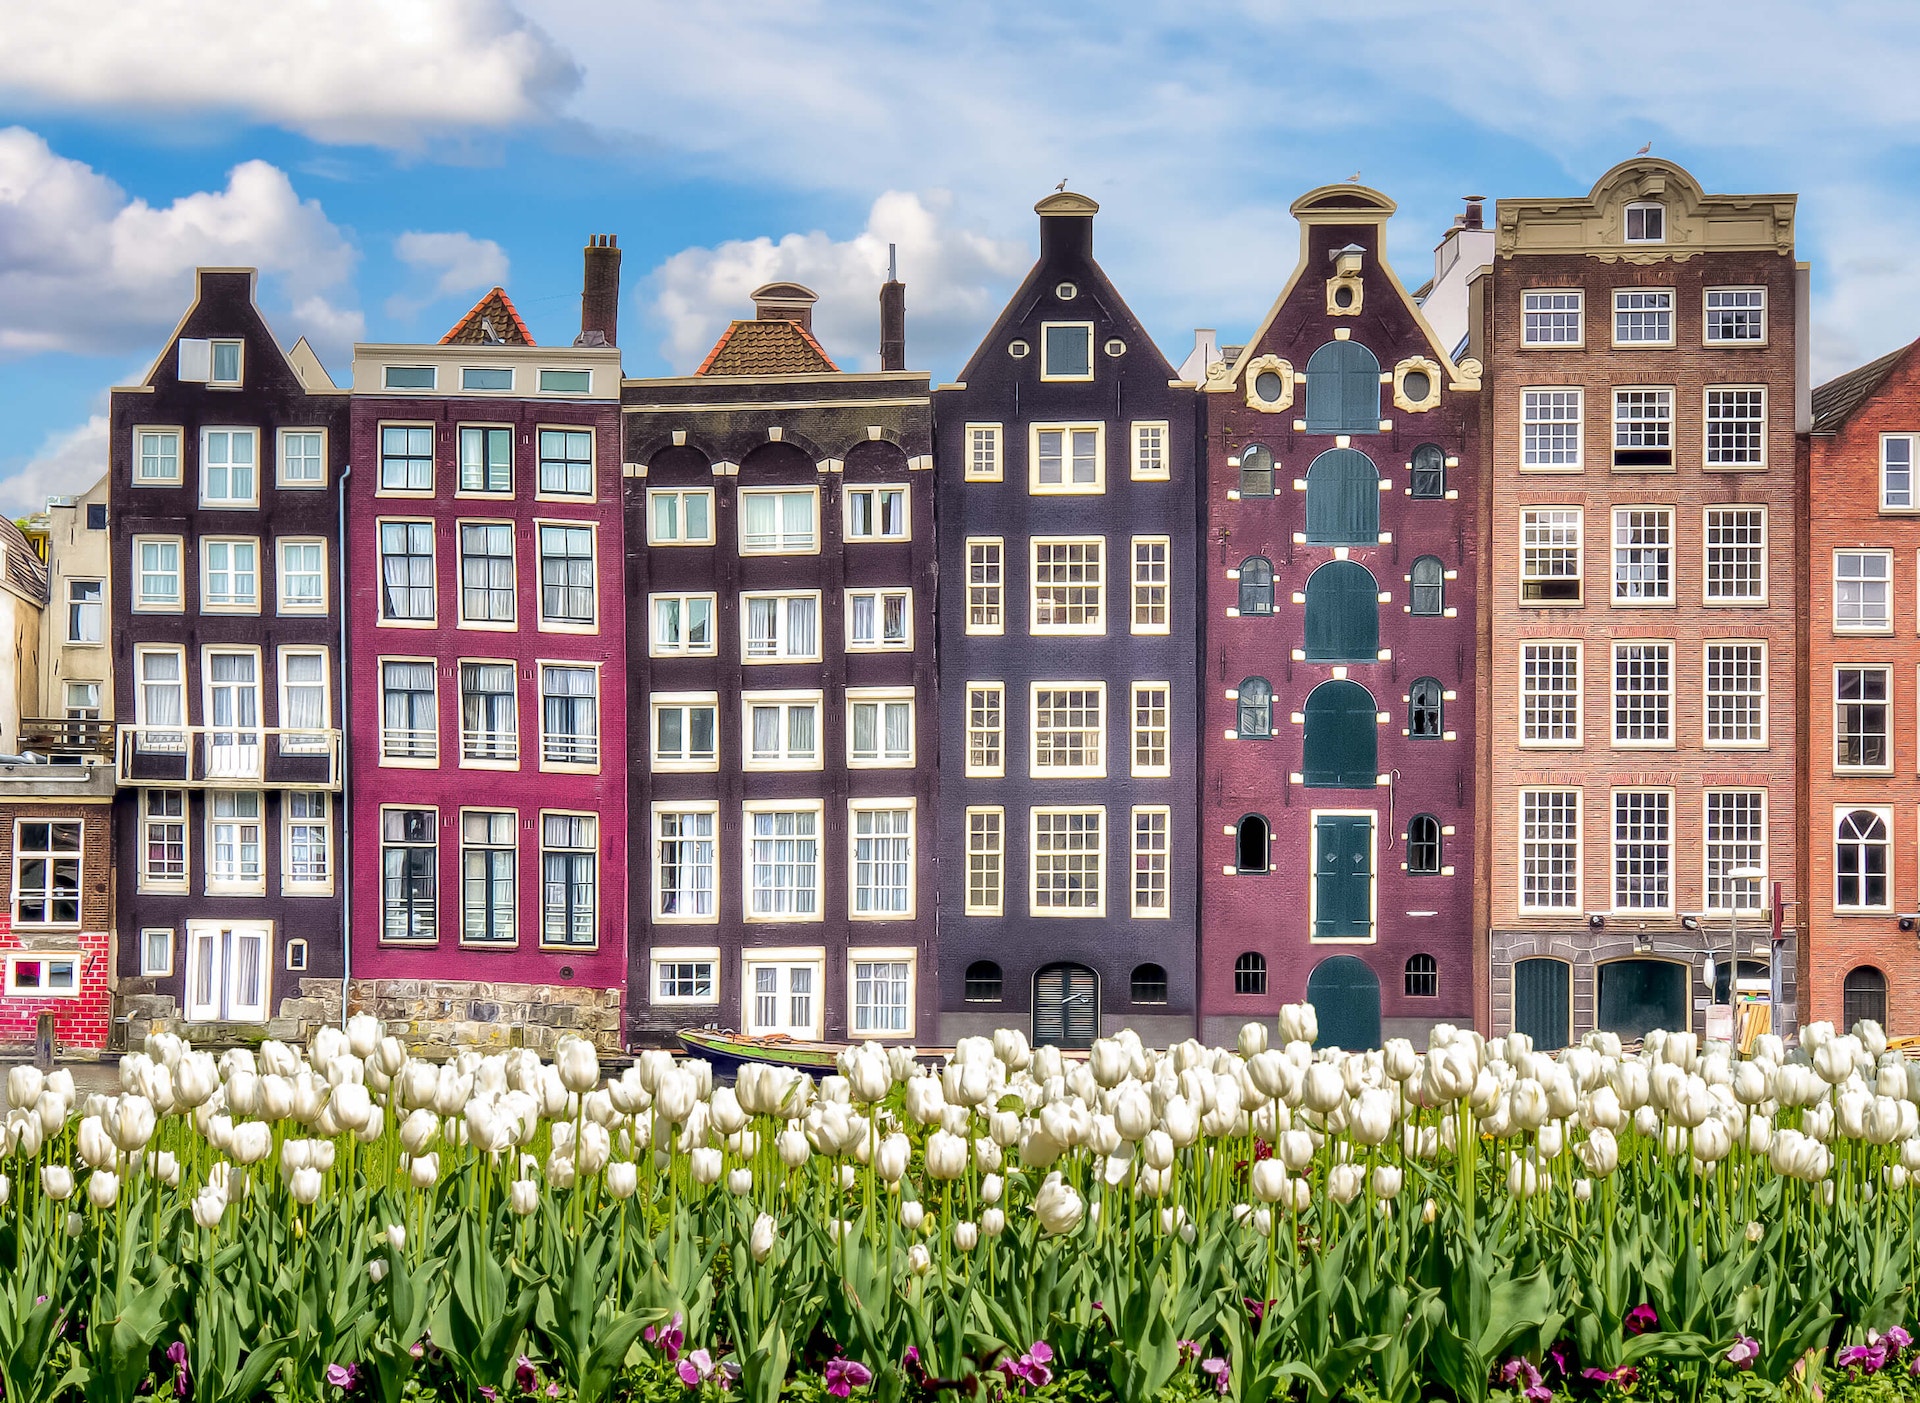 Amsterdam buildings rising above tulip beds